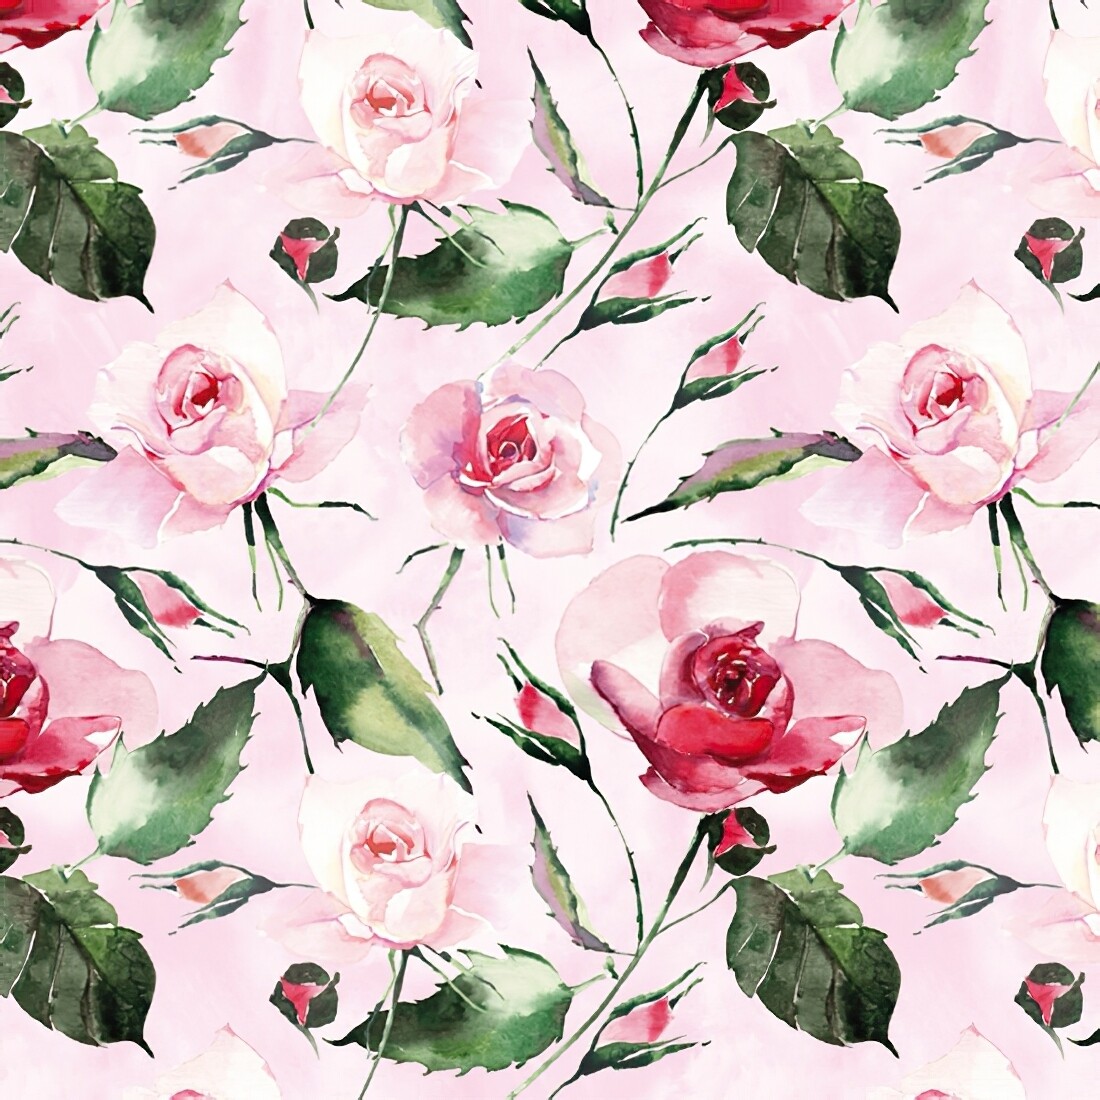 Decoupage Paper Napkins - Floral - Powdery Roses Pink (1 Sheet)